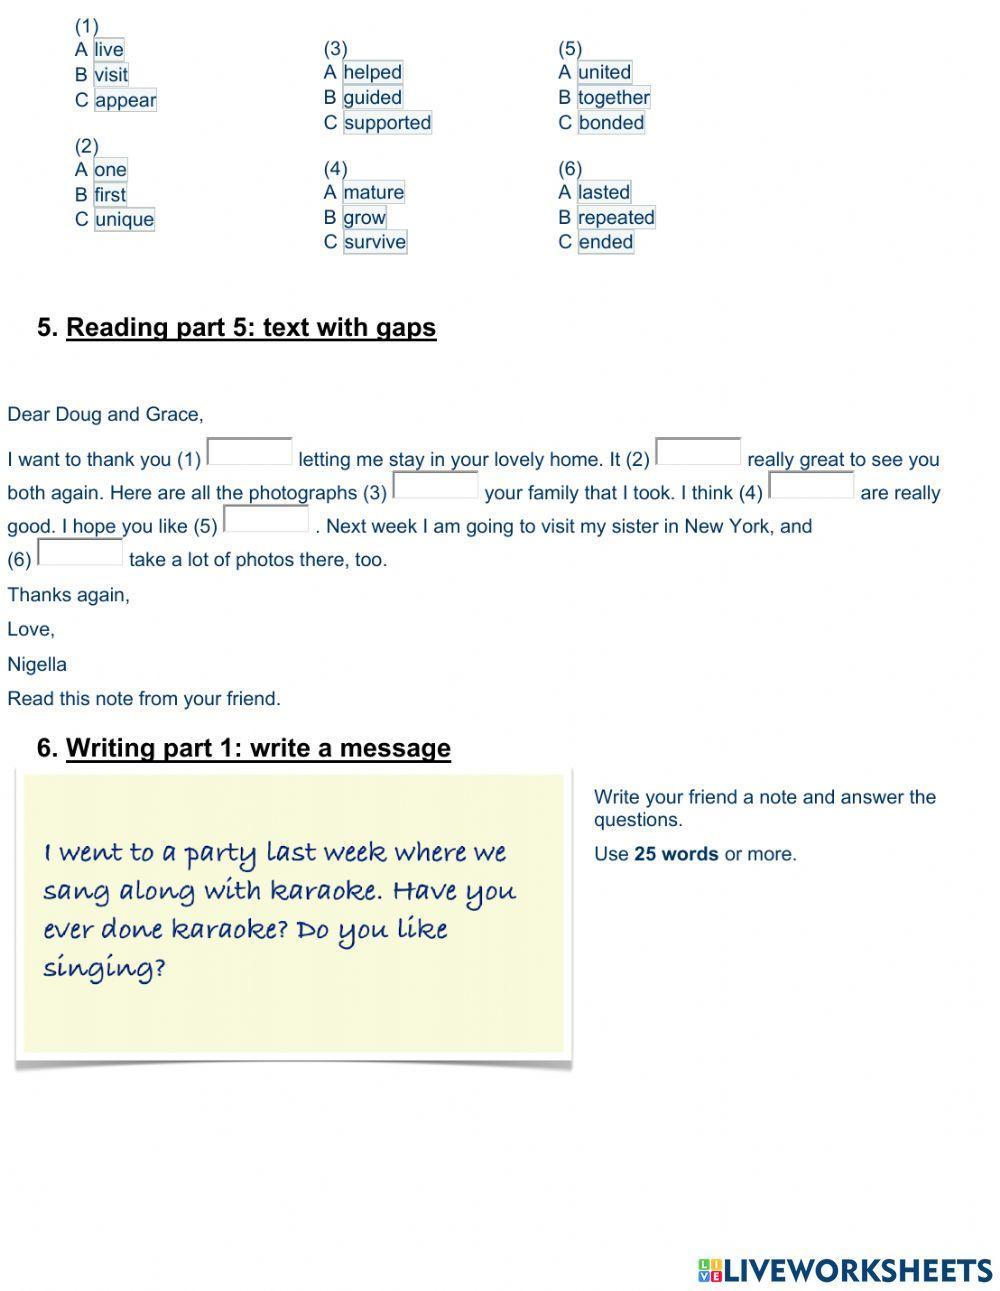 KET Reading and Writing Test